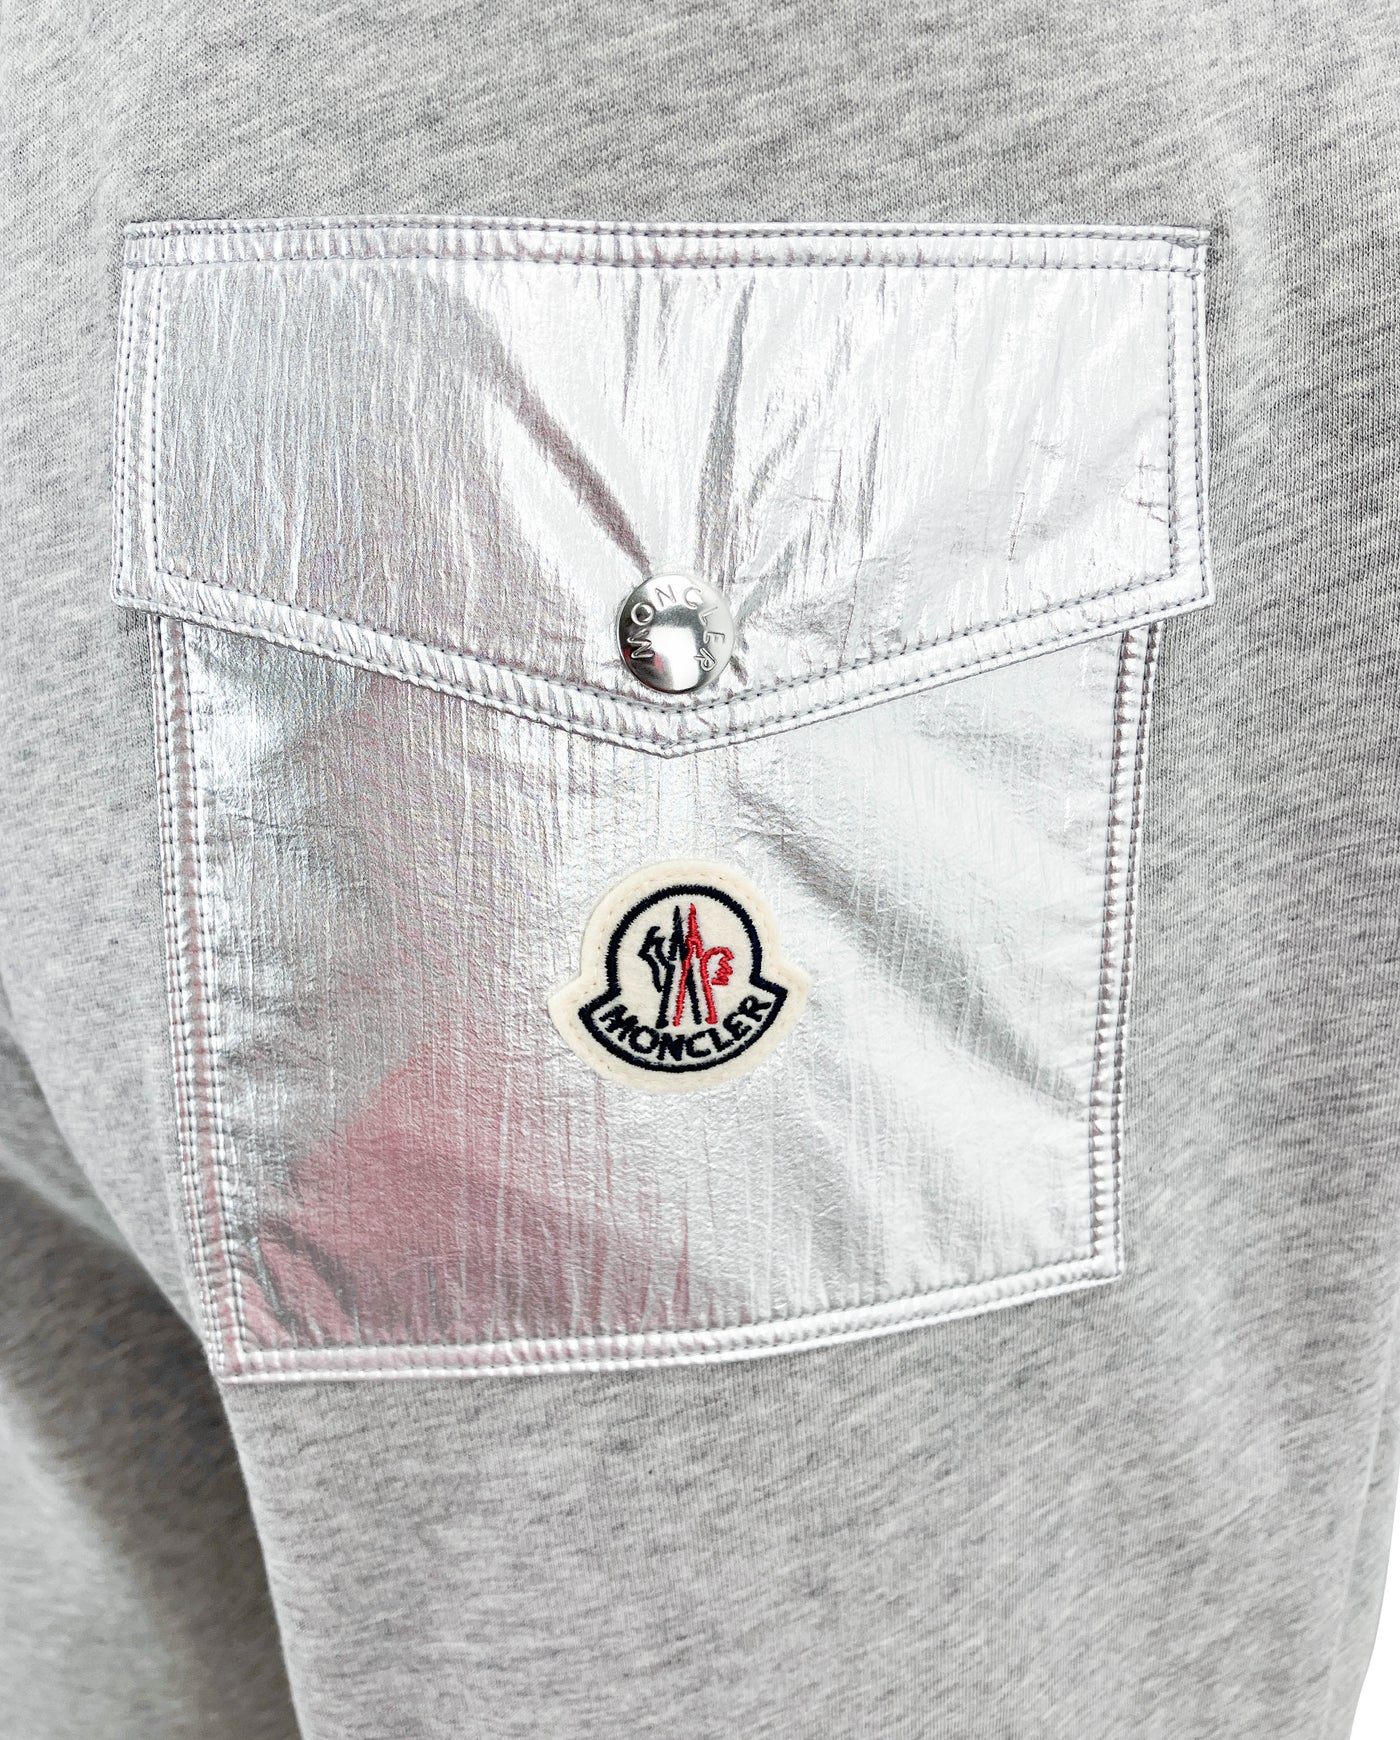 Moncler Embroidered Logo Sweatshorts in Grey - Discounts on Moncler at UAL